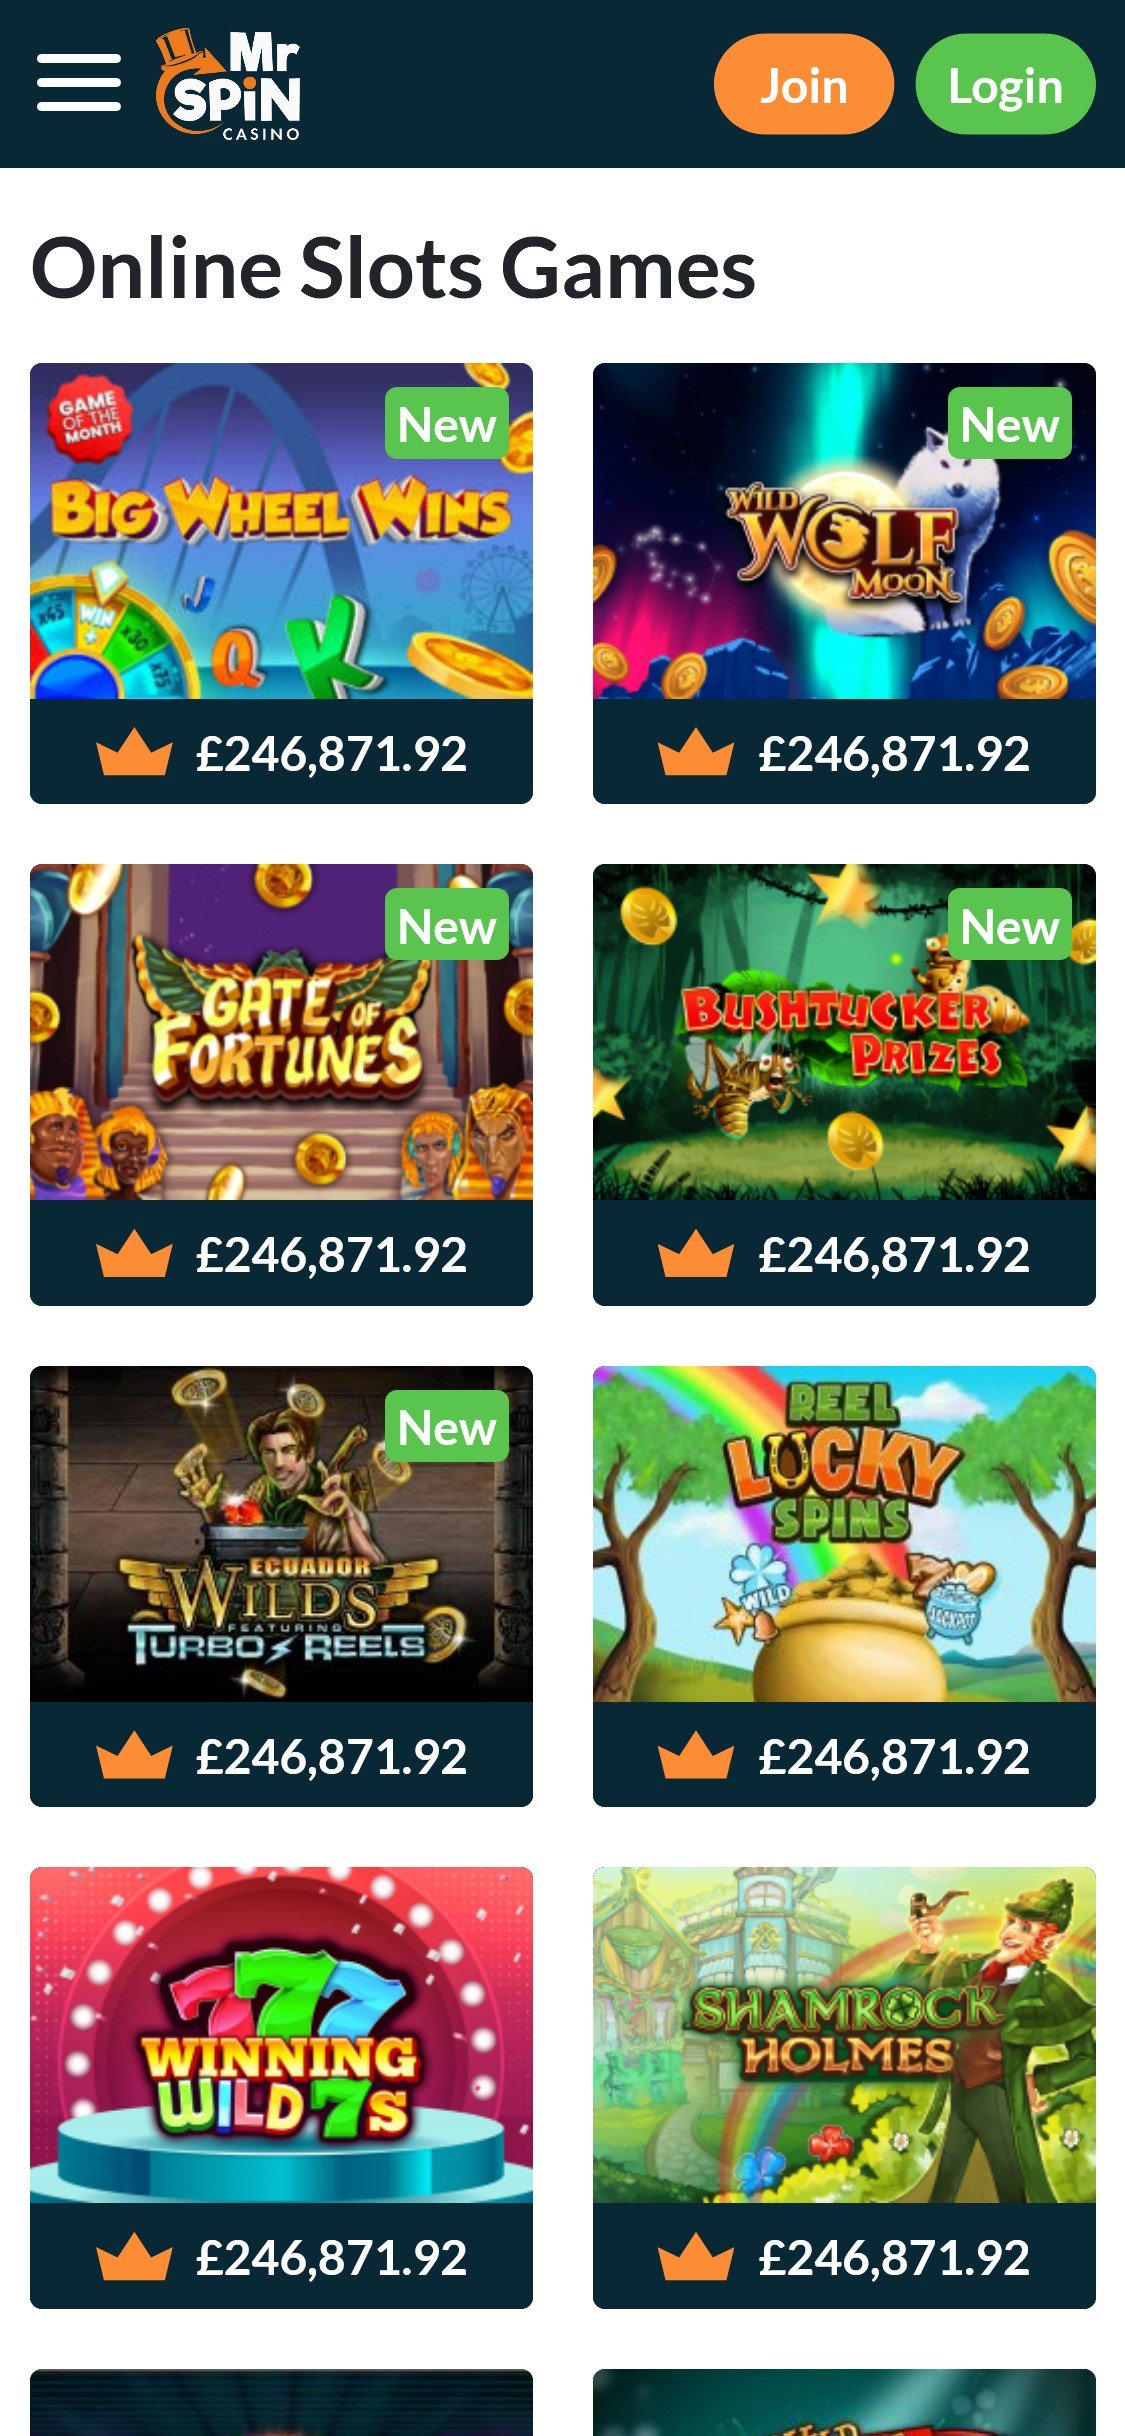 Mr Spin Casino UK Mobile Games Review